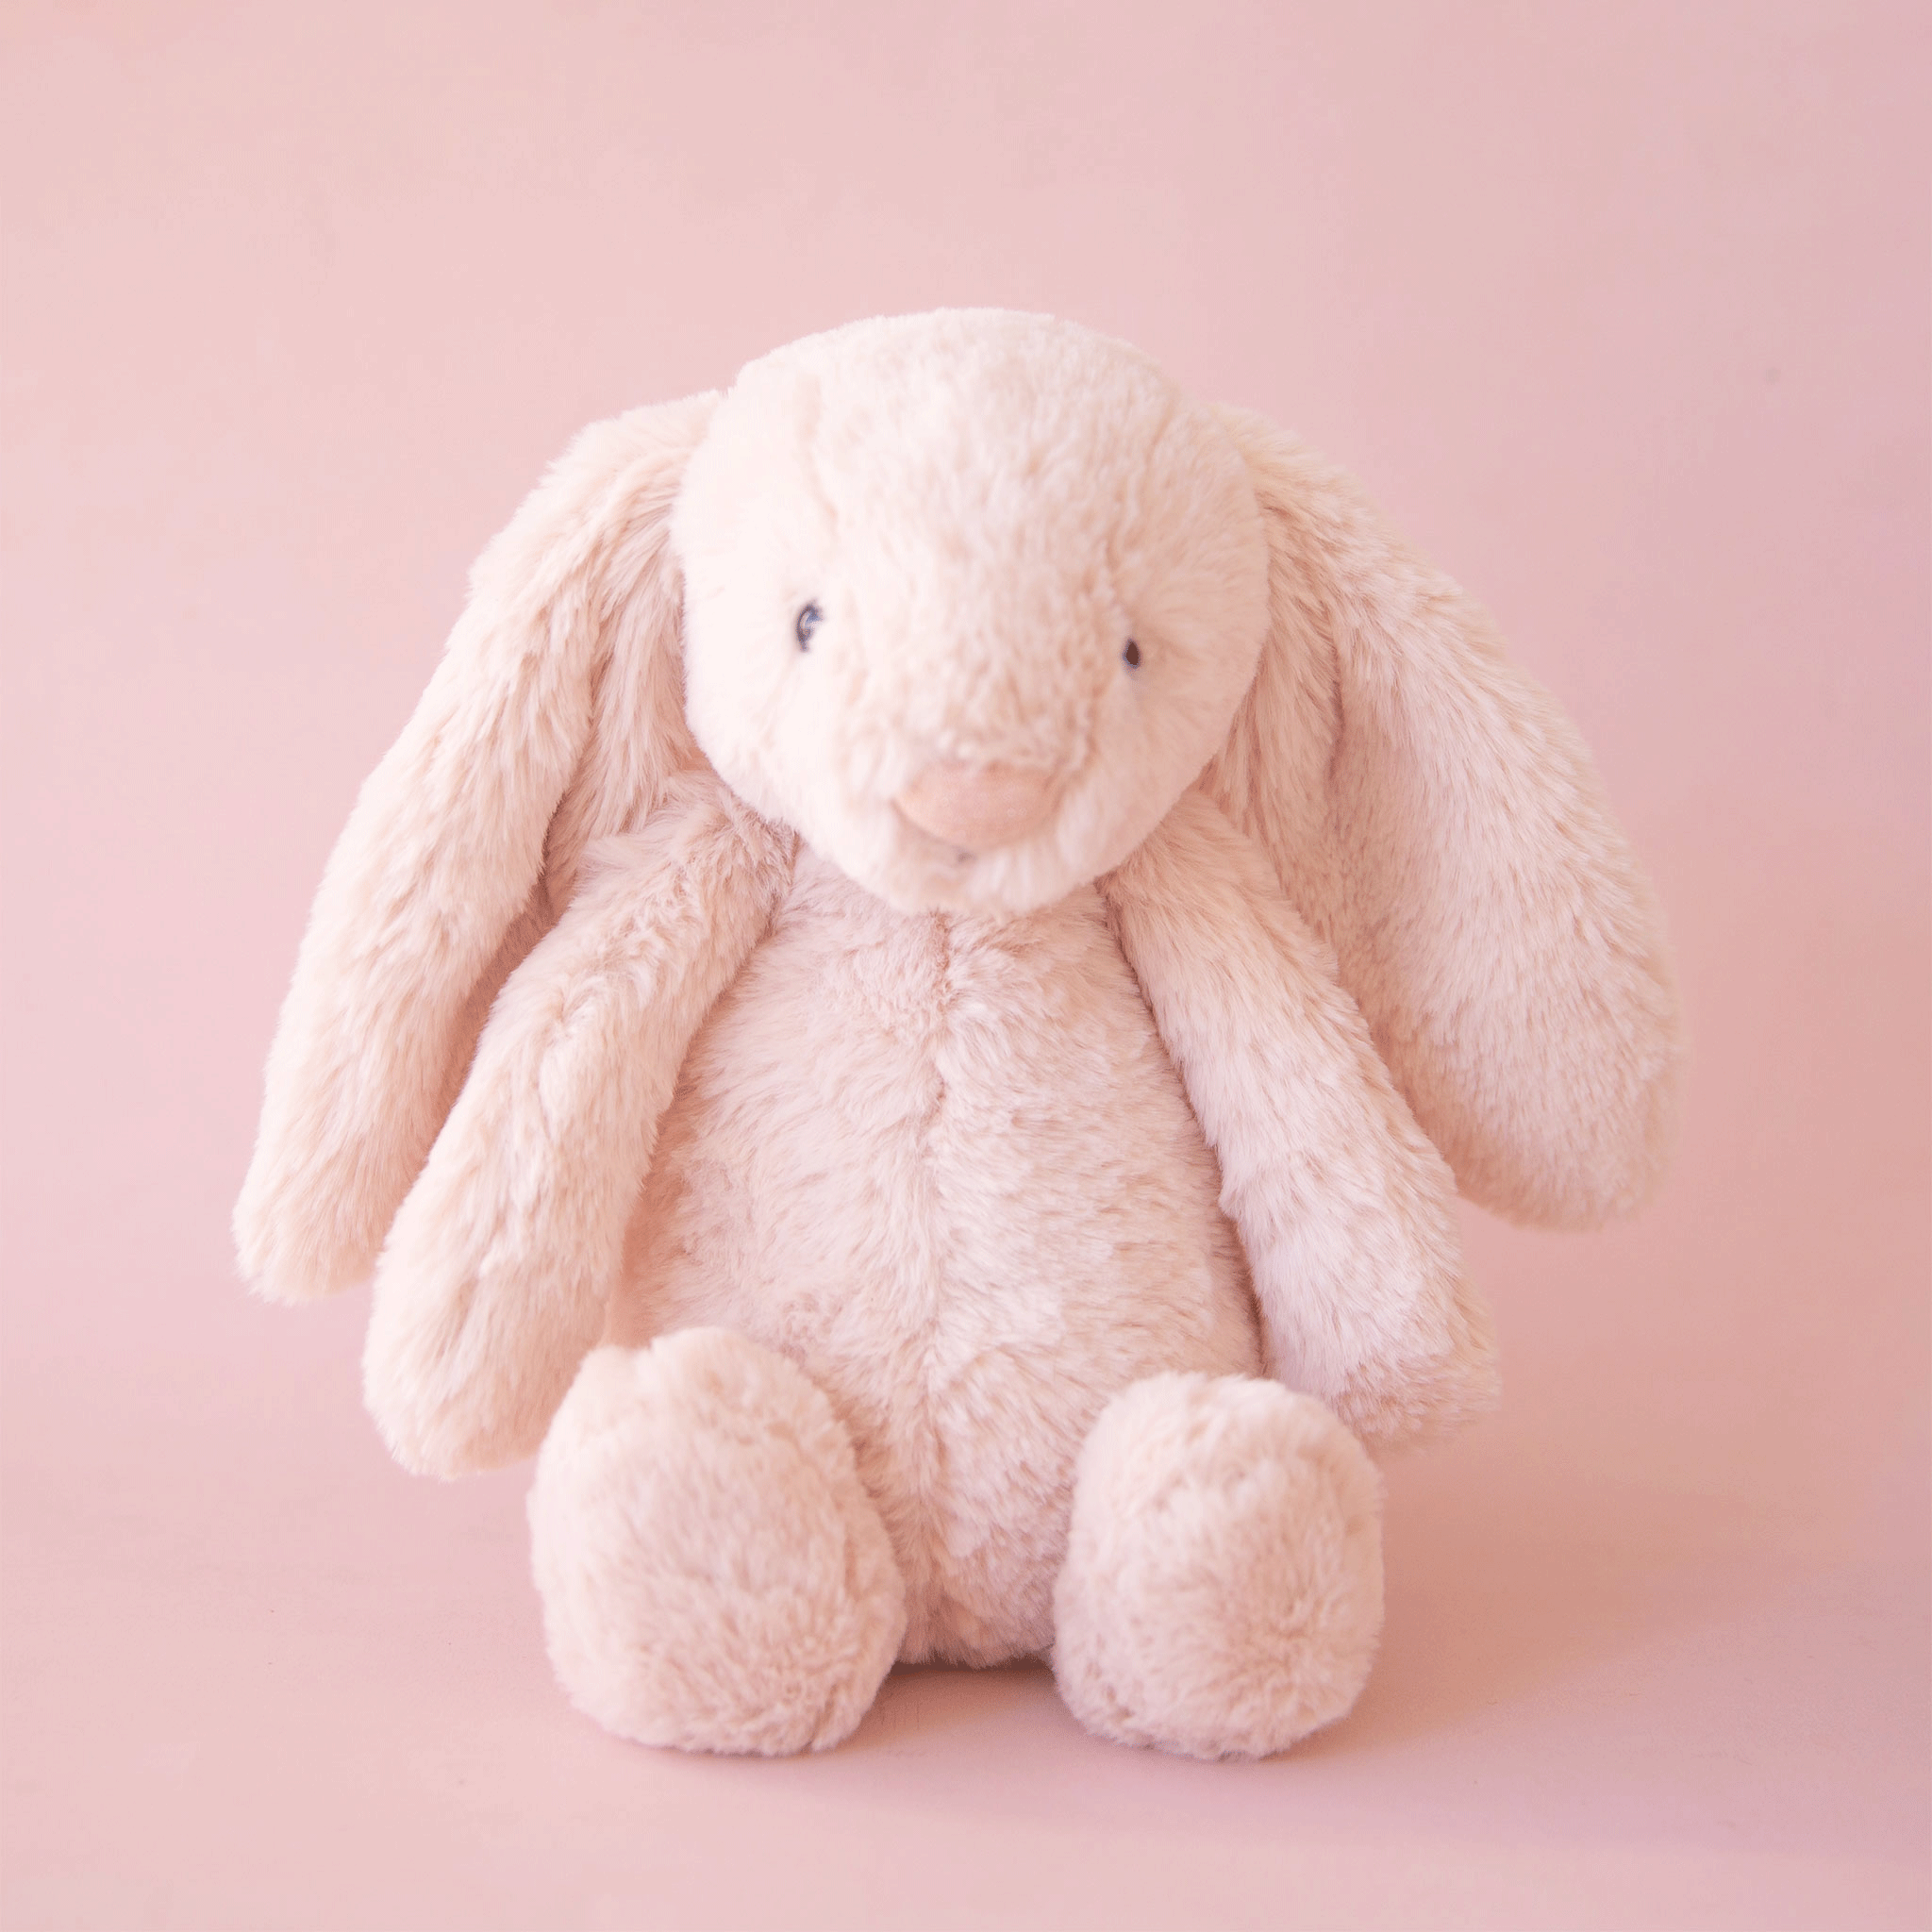 On a pink background is a cream colored stuffed animal bunny with long floppy ears and super soft faux fur.